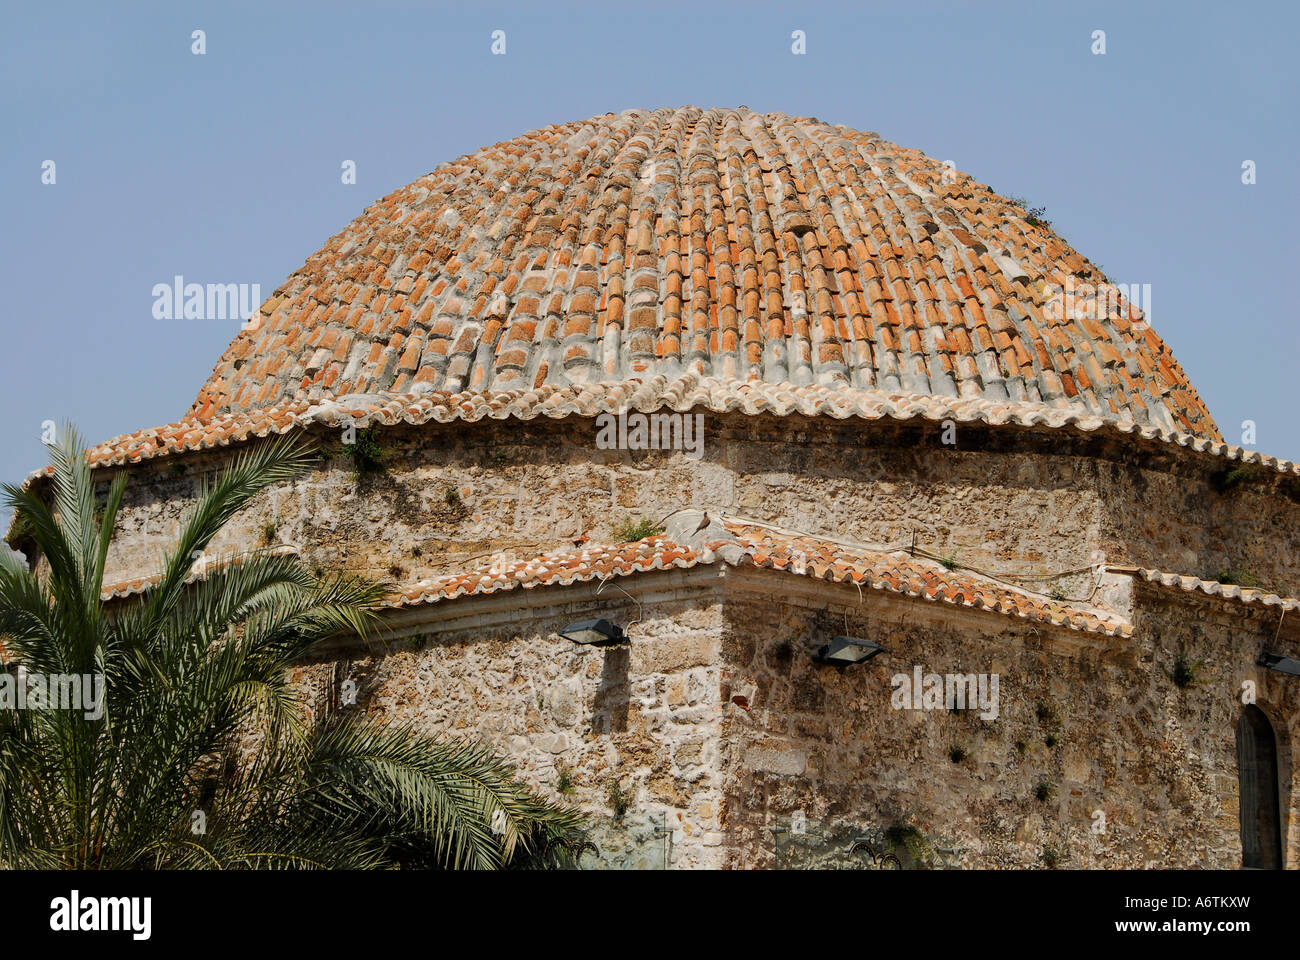 Old tiled domed structure in Kaleici (Old Antalya) Turkey Stock Photo